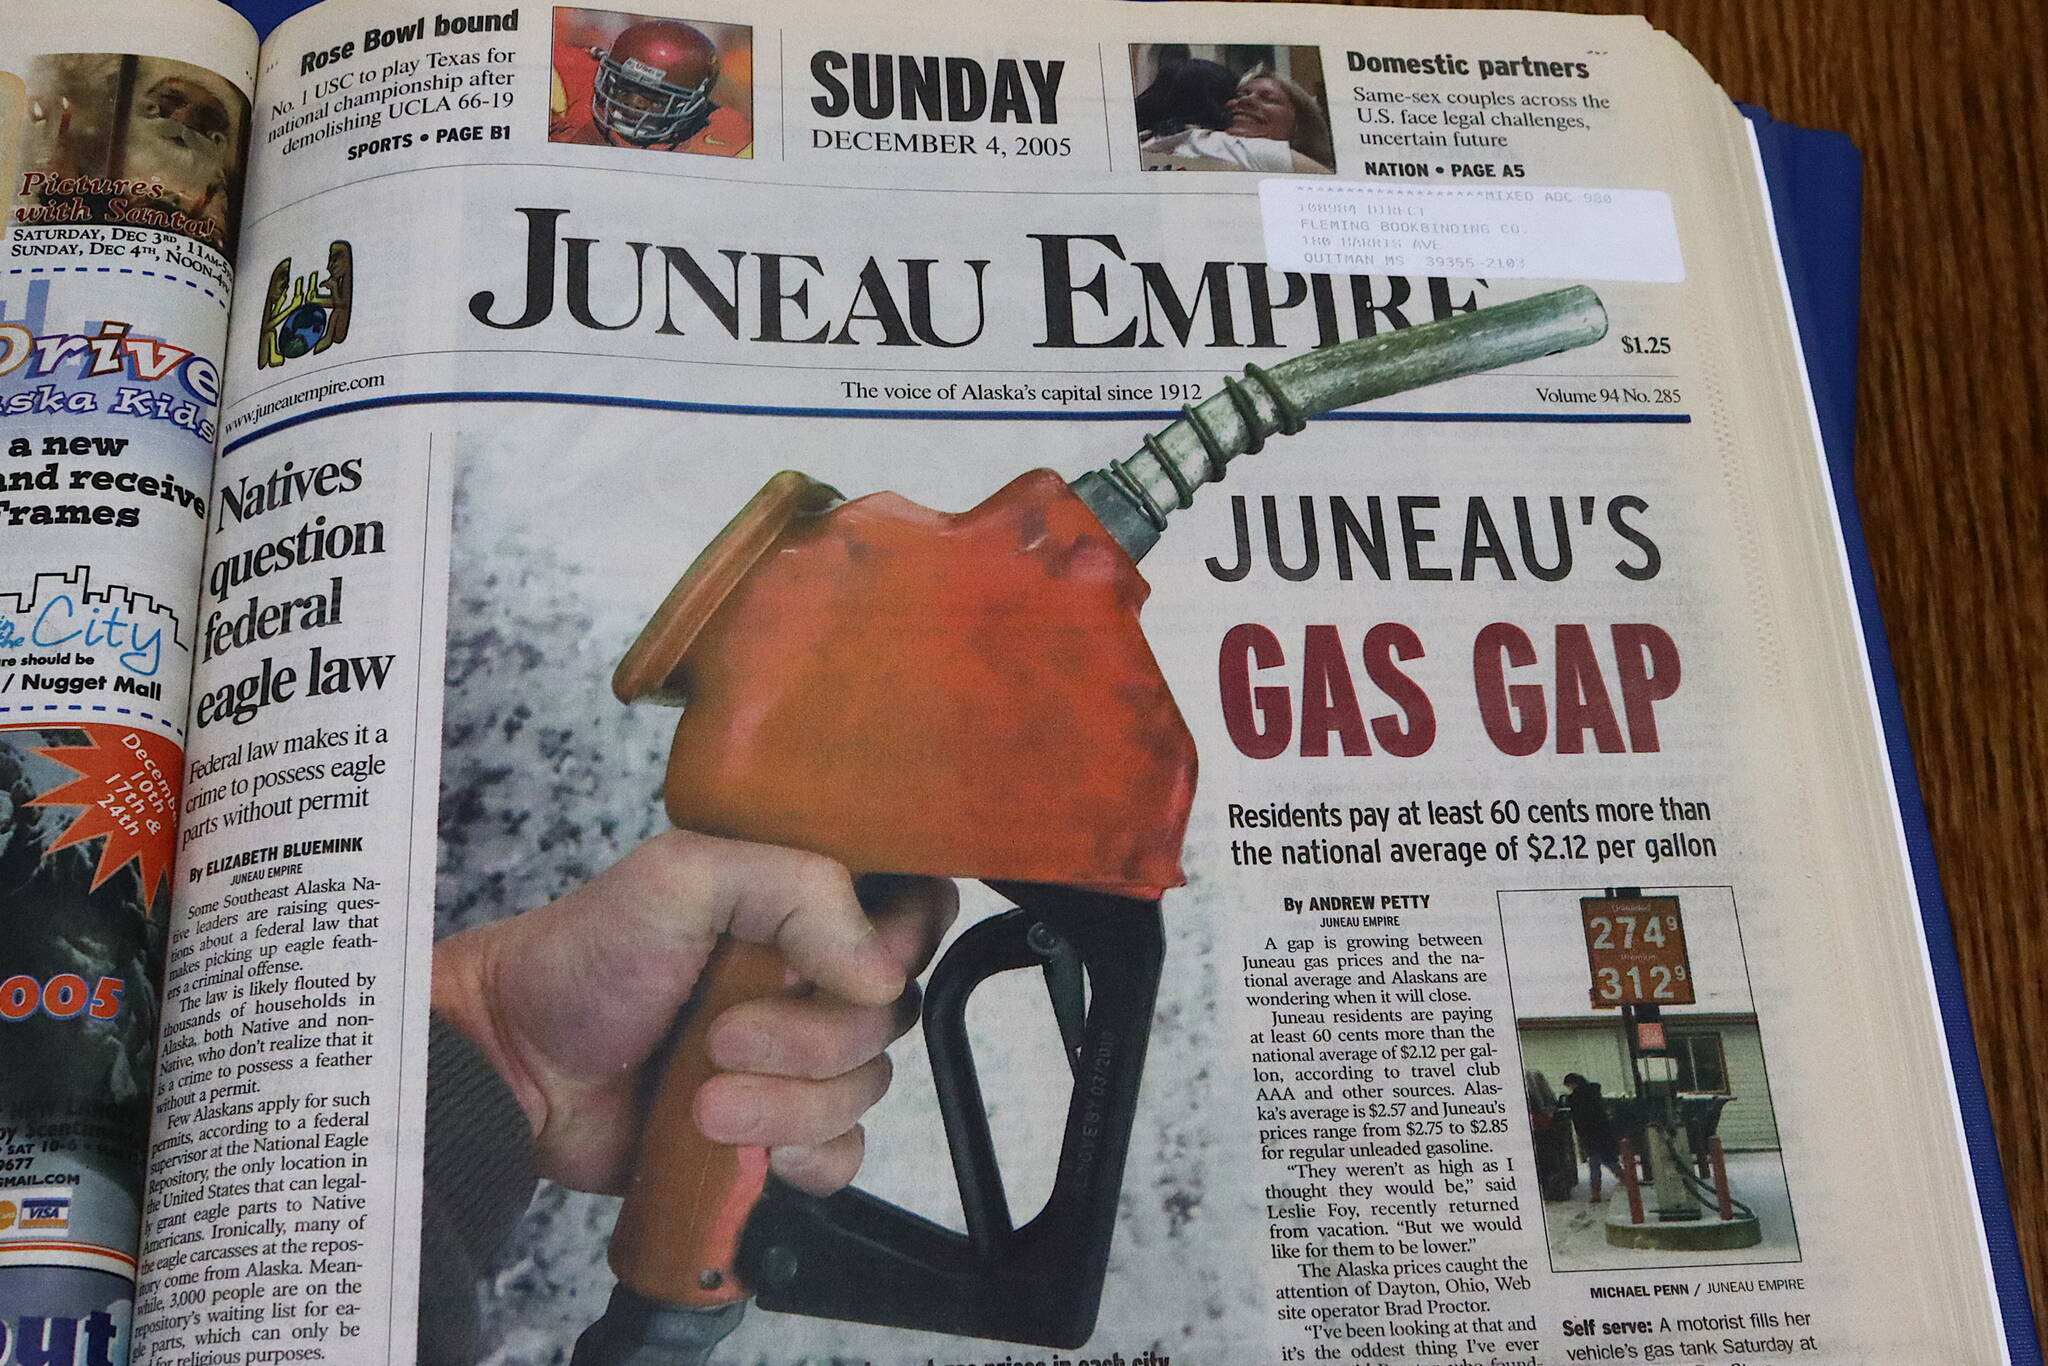 The front page of the Juneau Empire on Dec. 4, 2005. (Mark Sabbatini / Juneau Empire)